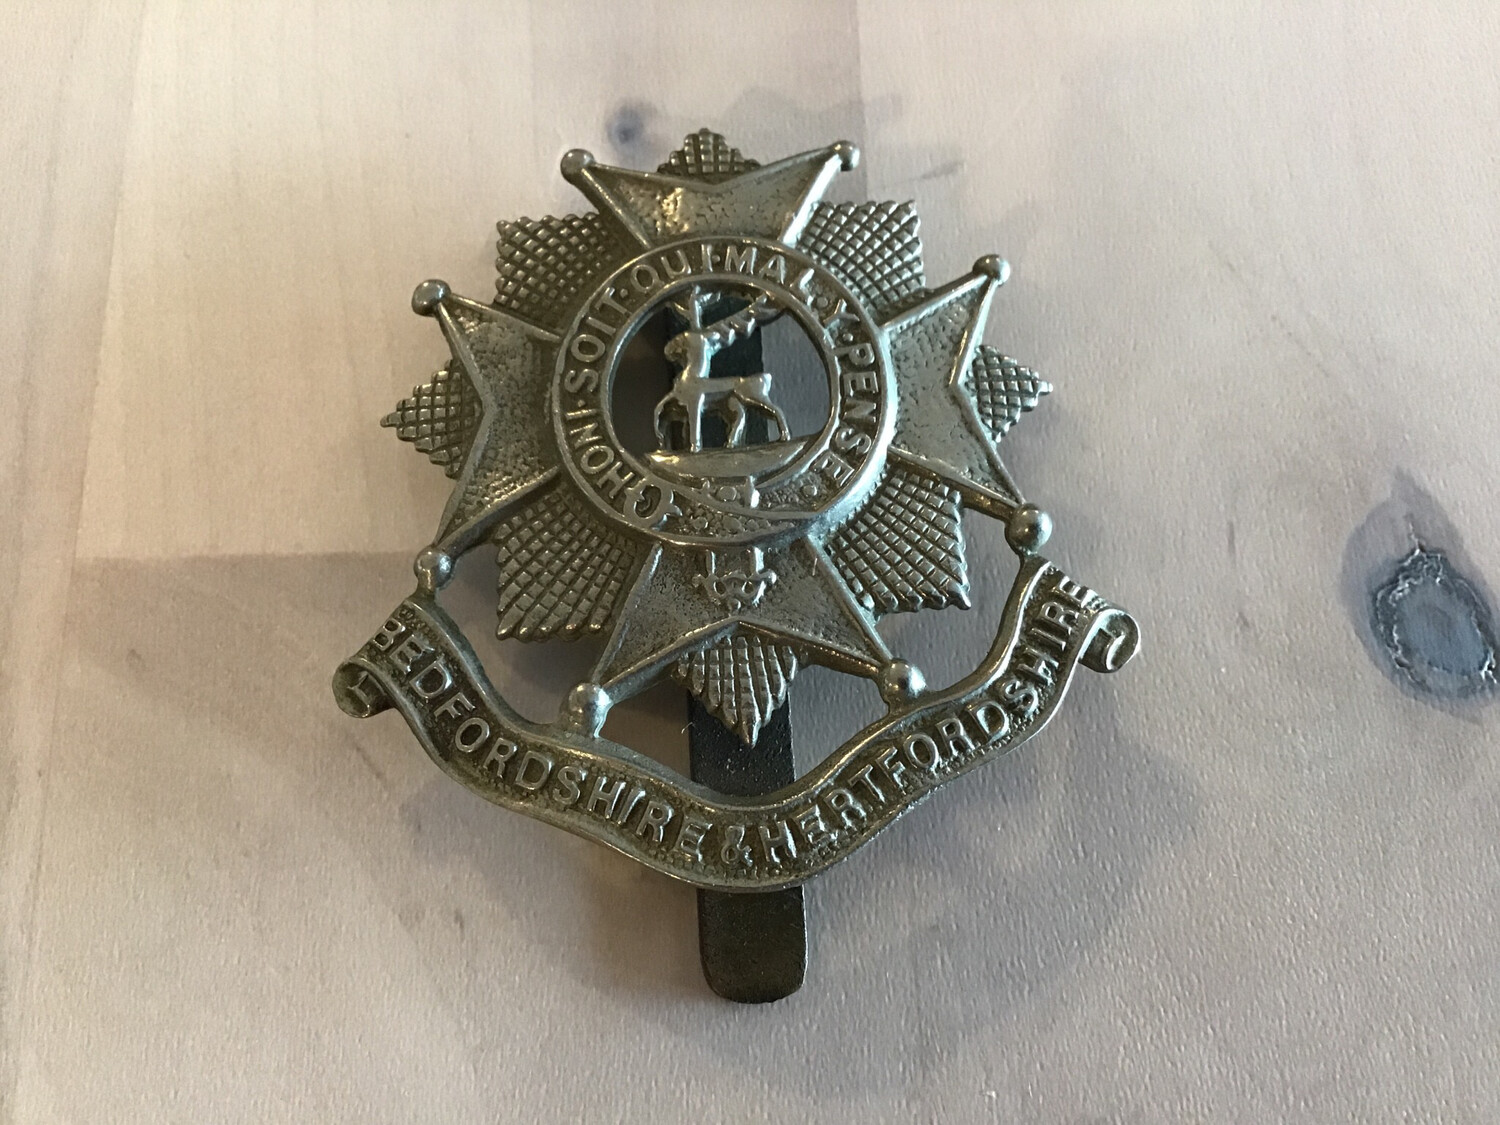 Bedfordshire And Hertfordshire (Beds And Herts) Regiment Cap Badge